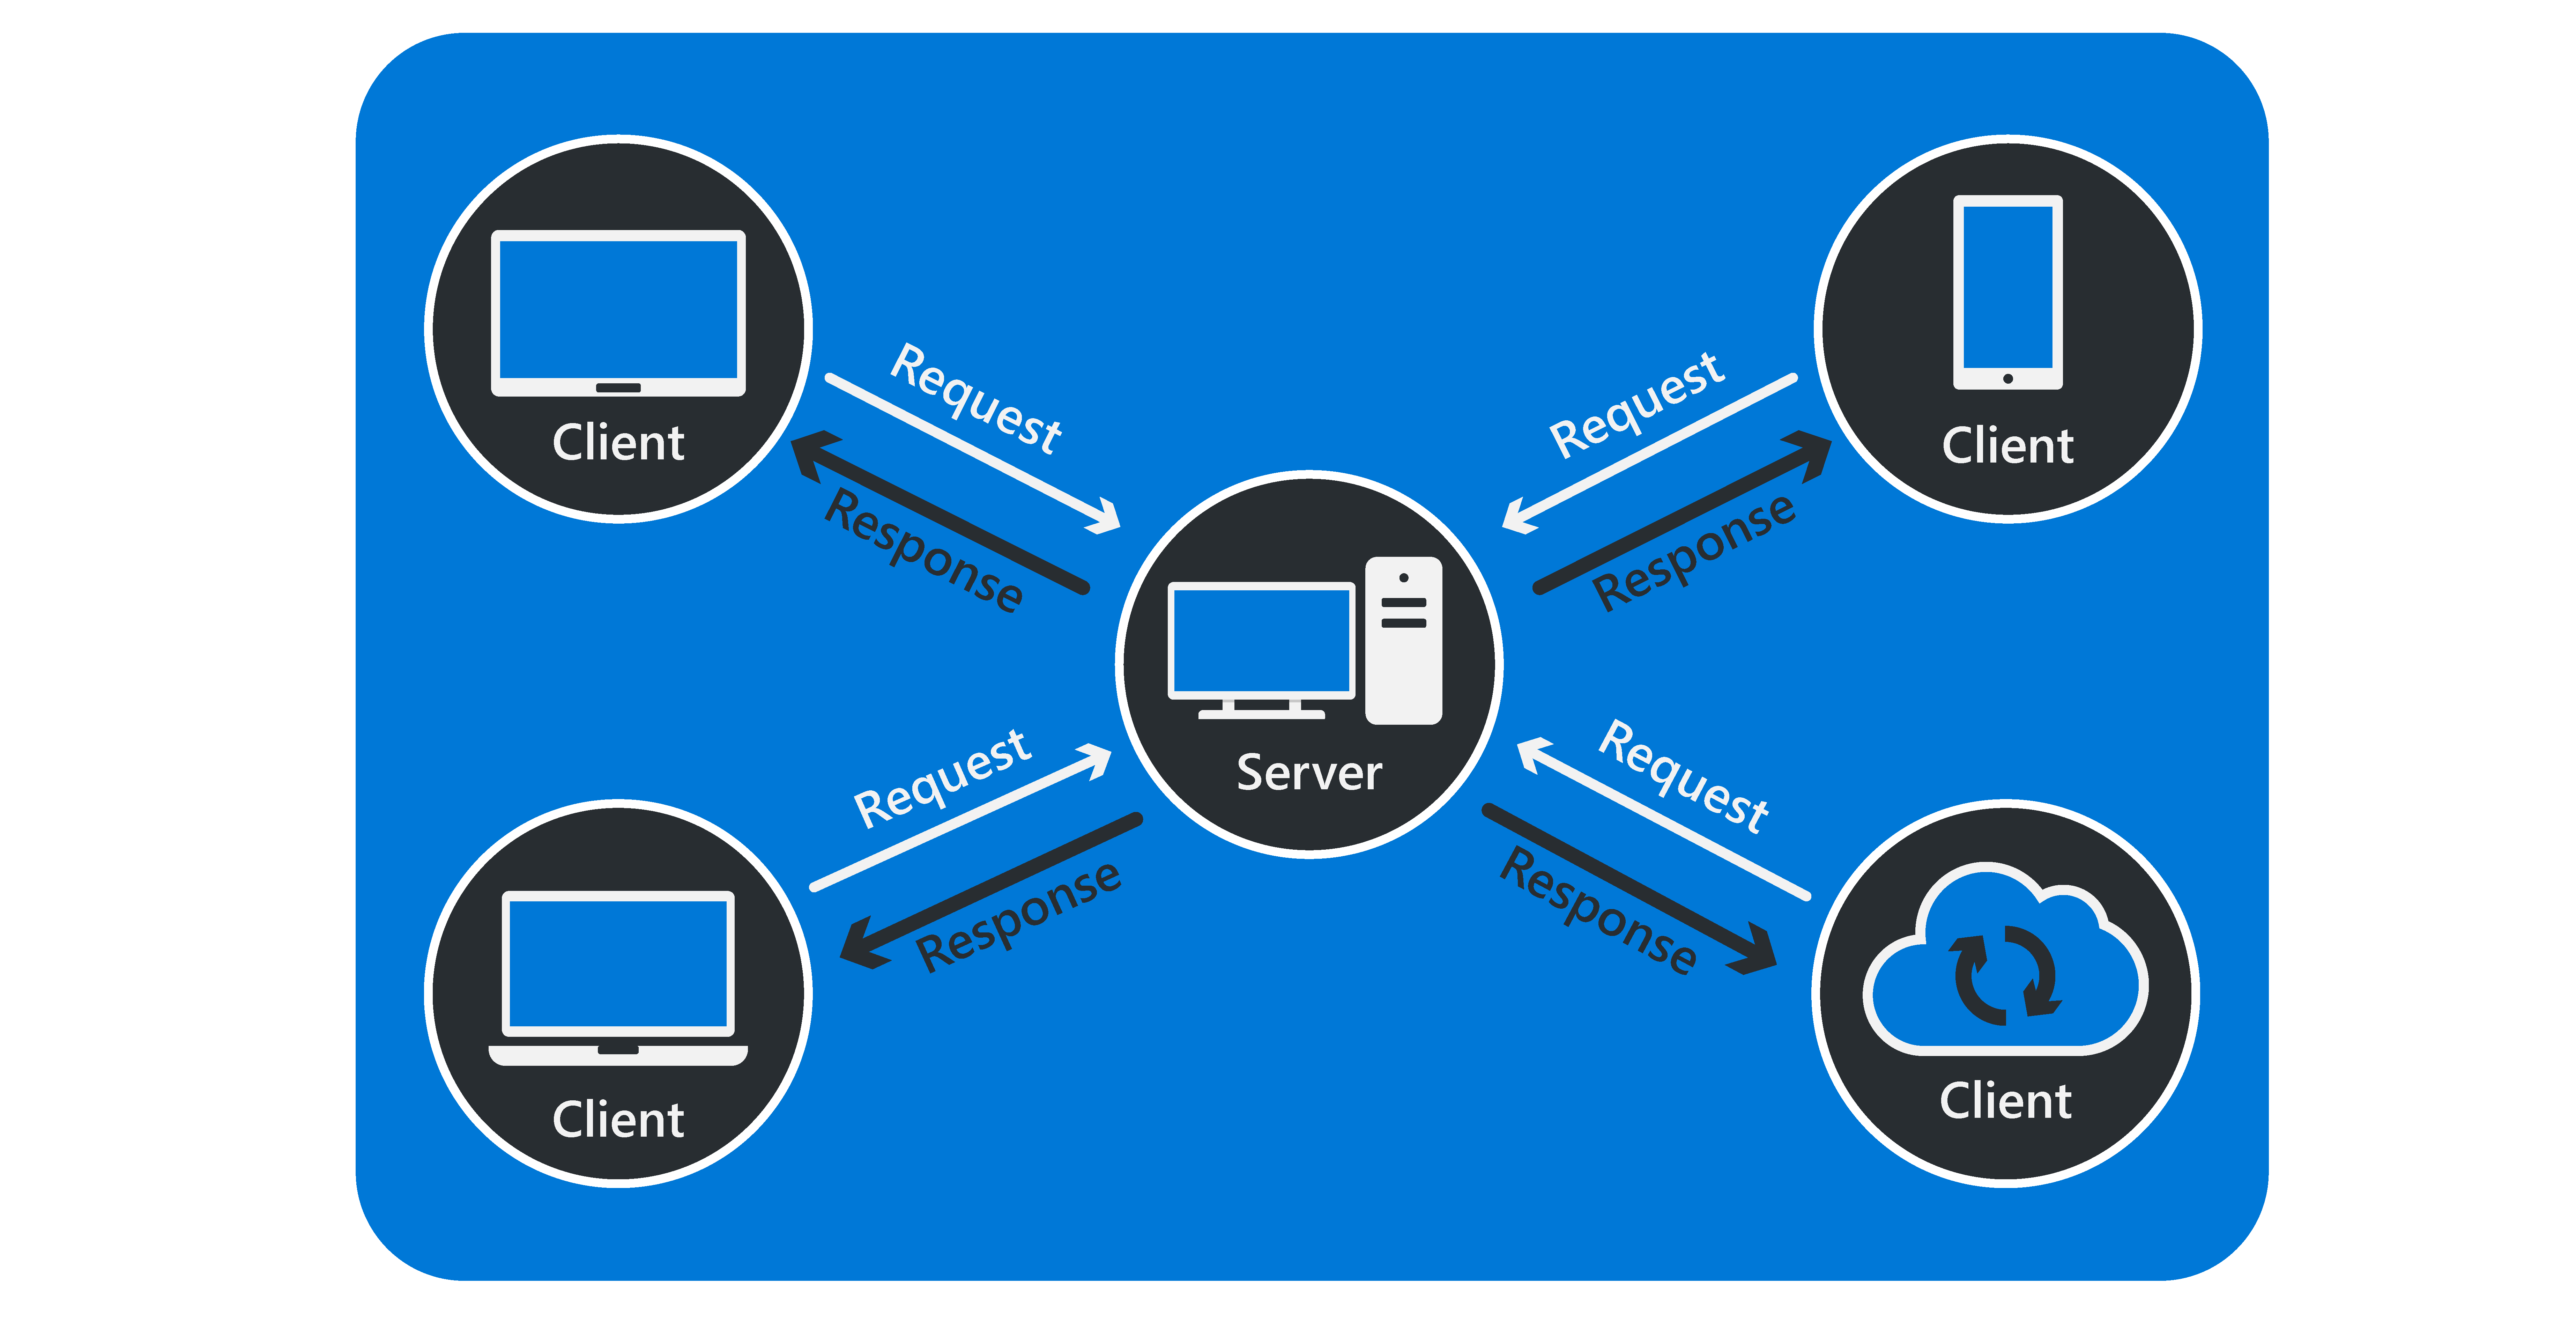 A diagram that shows a simple rendering of the client server with different client devices connecting a central server.